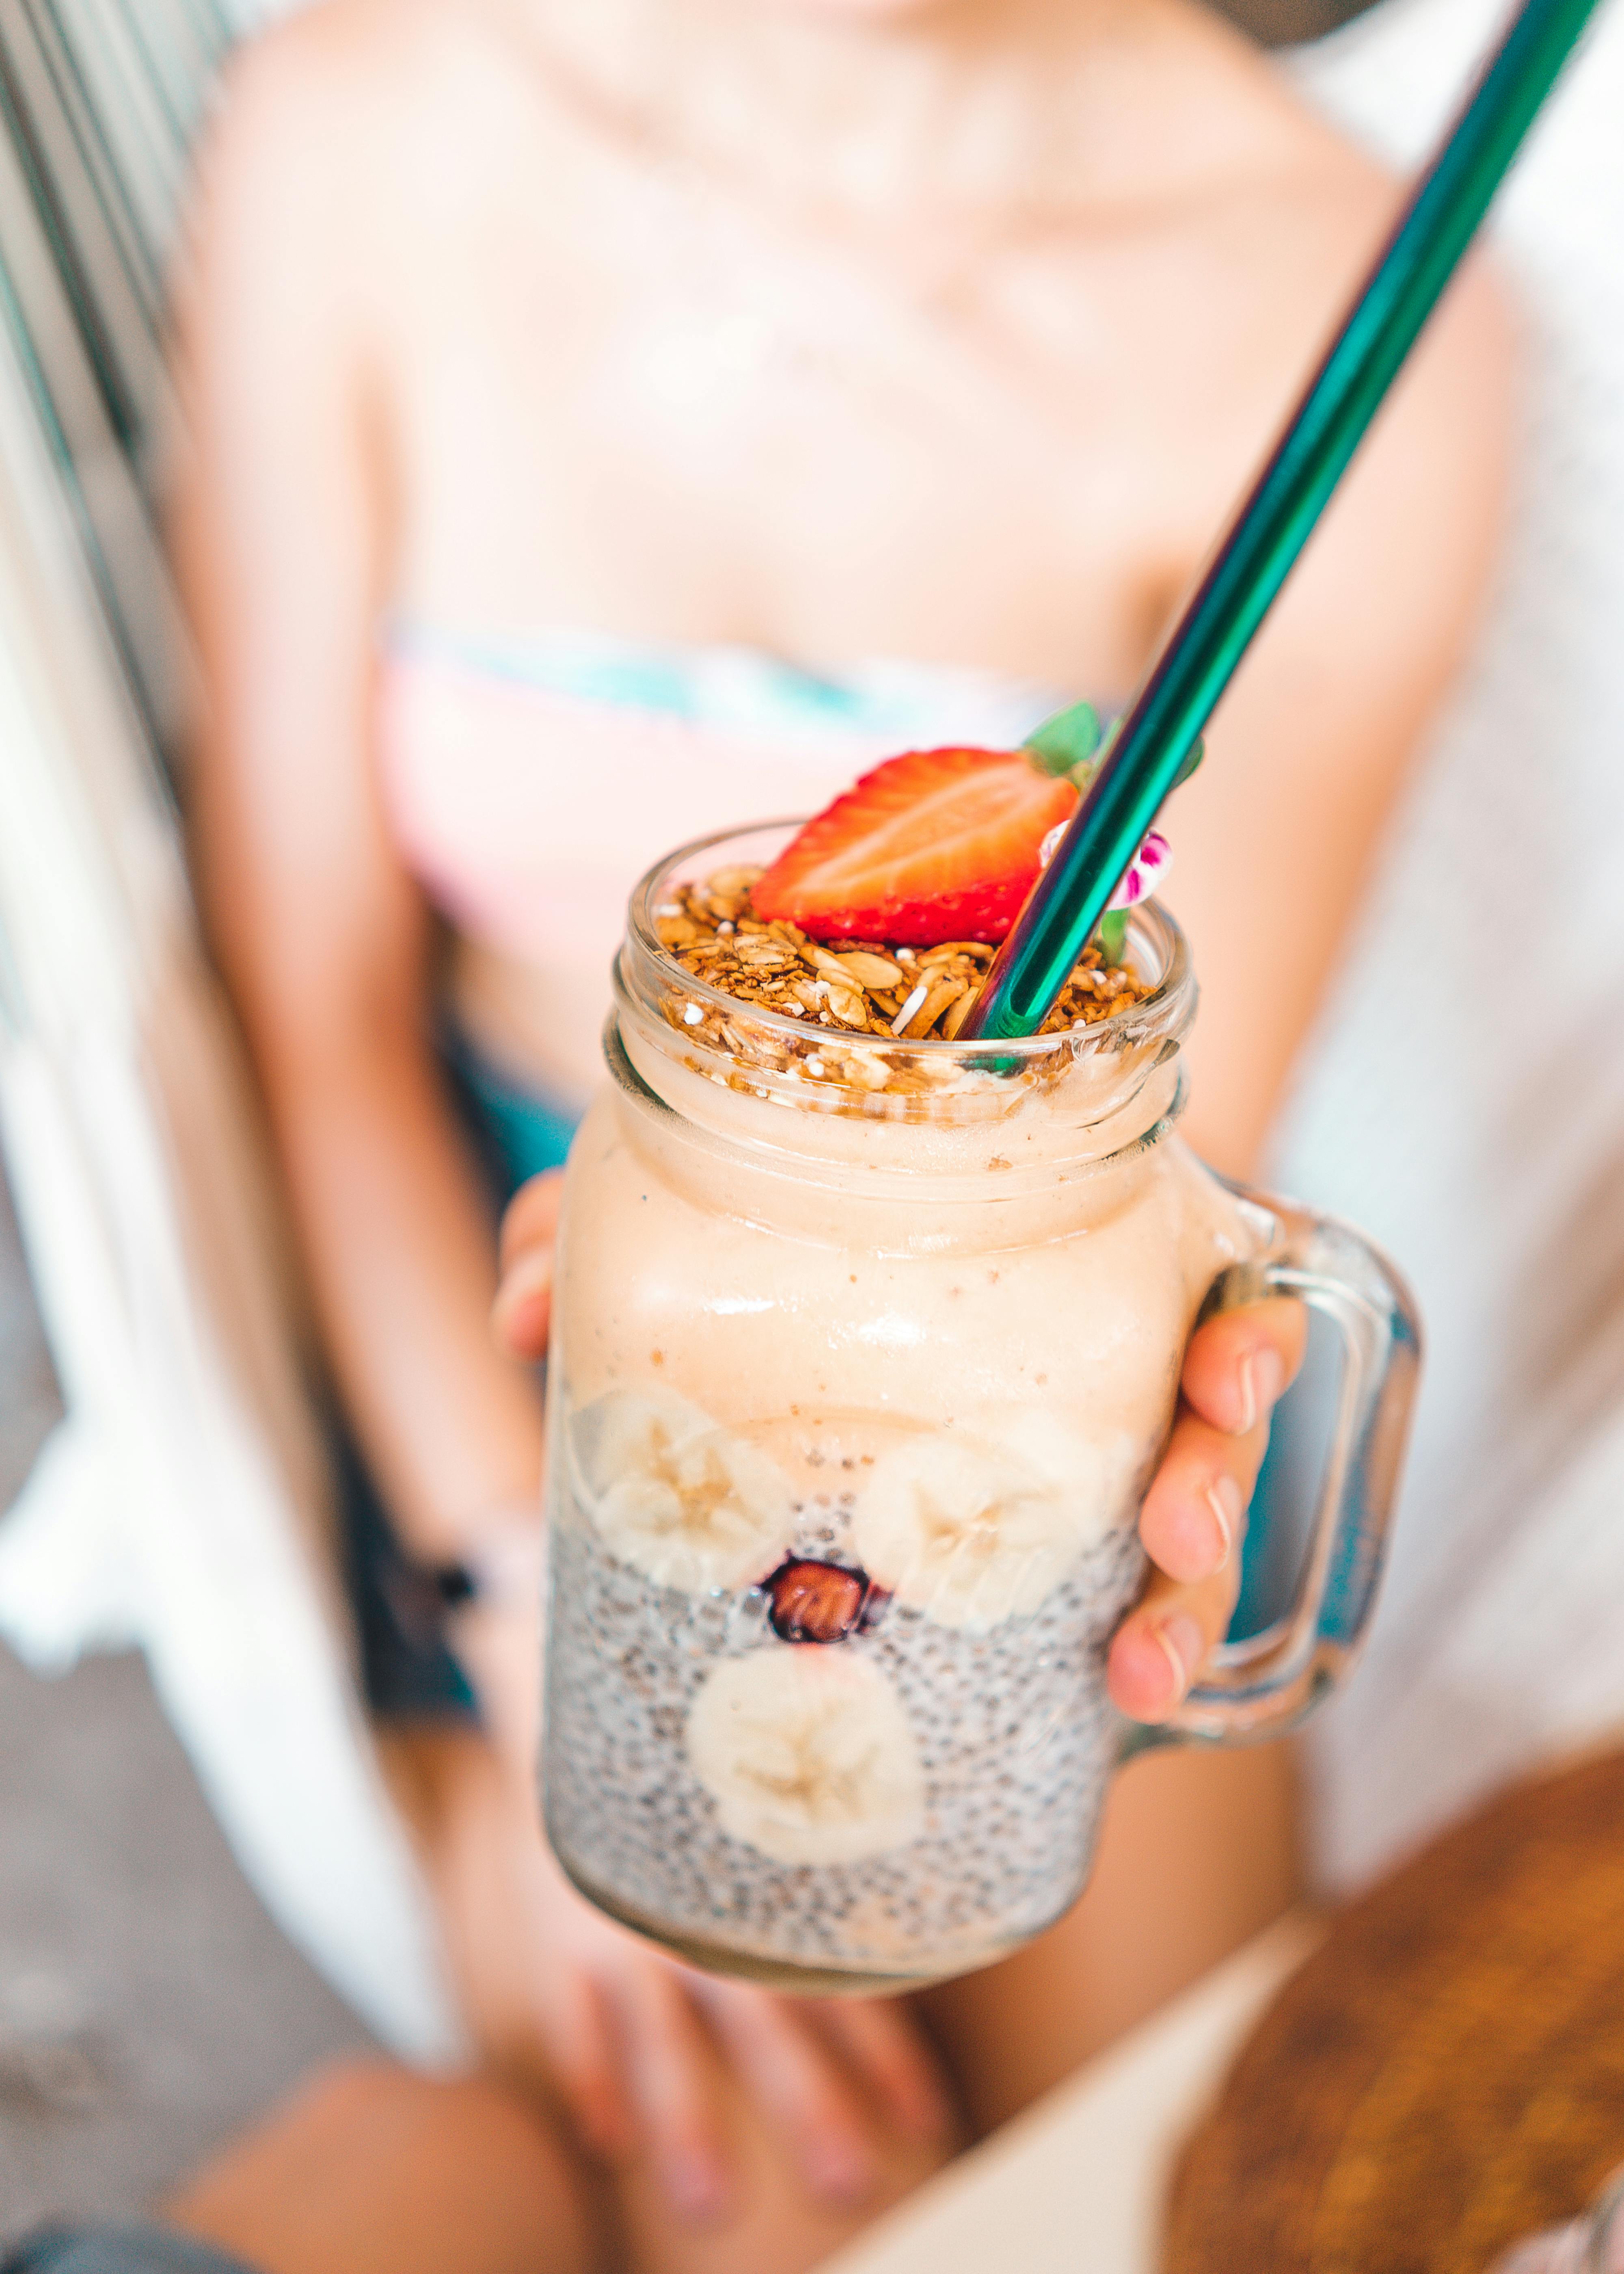 Healthy Smoothie In a Jar · Free Stock Photo